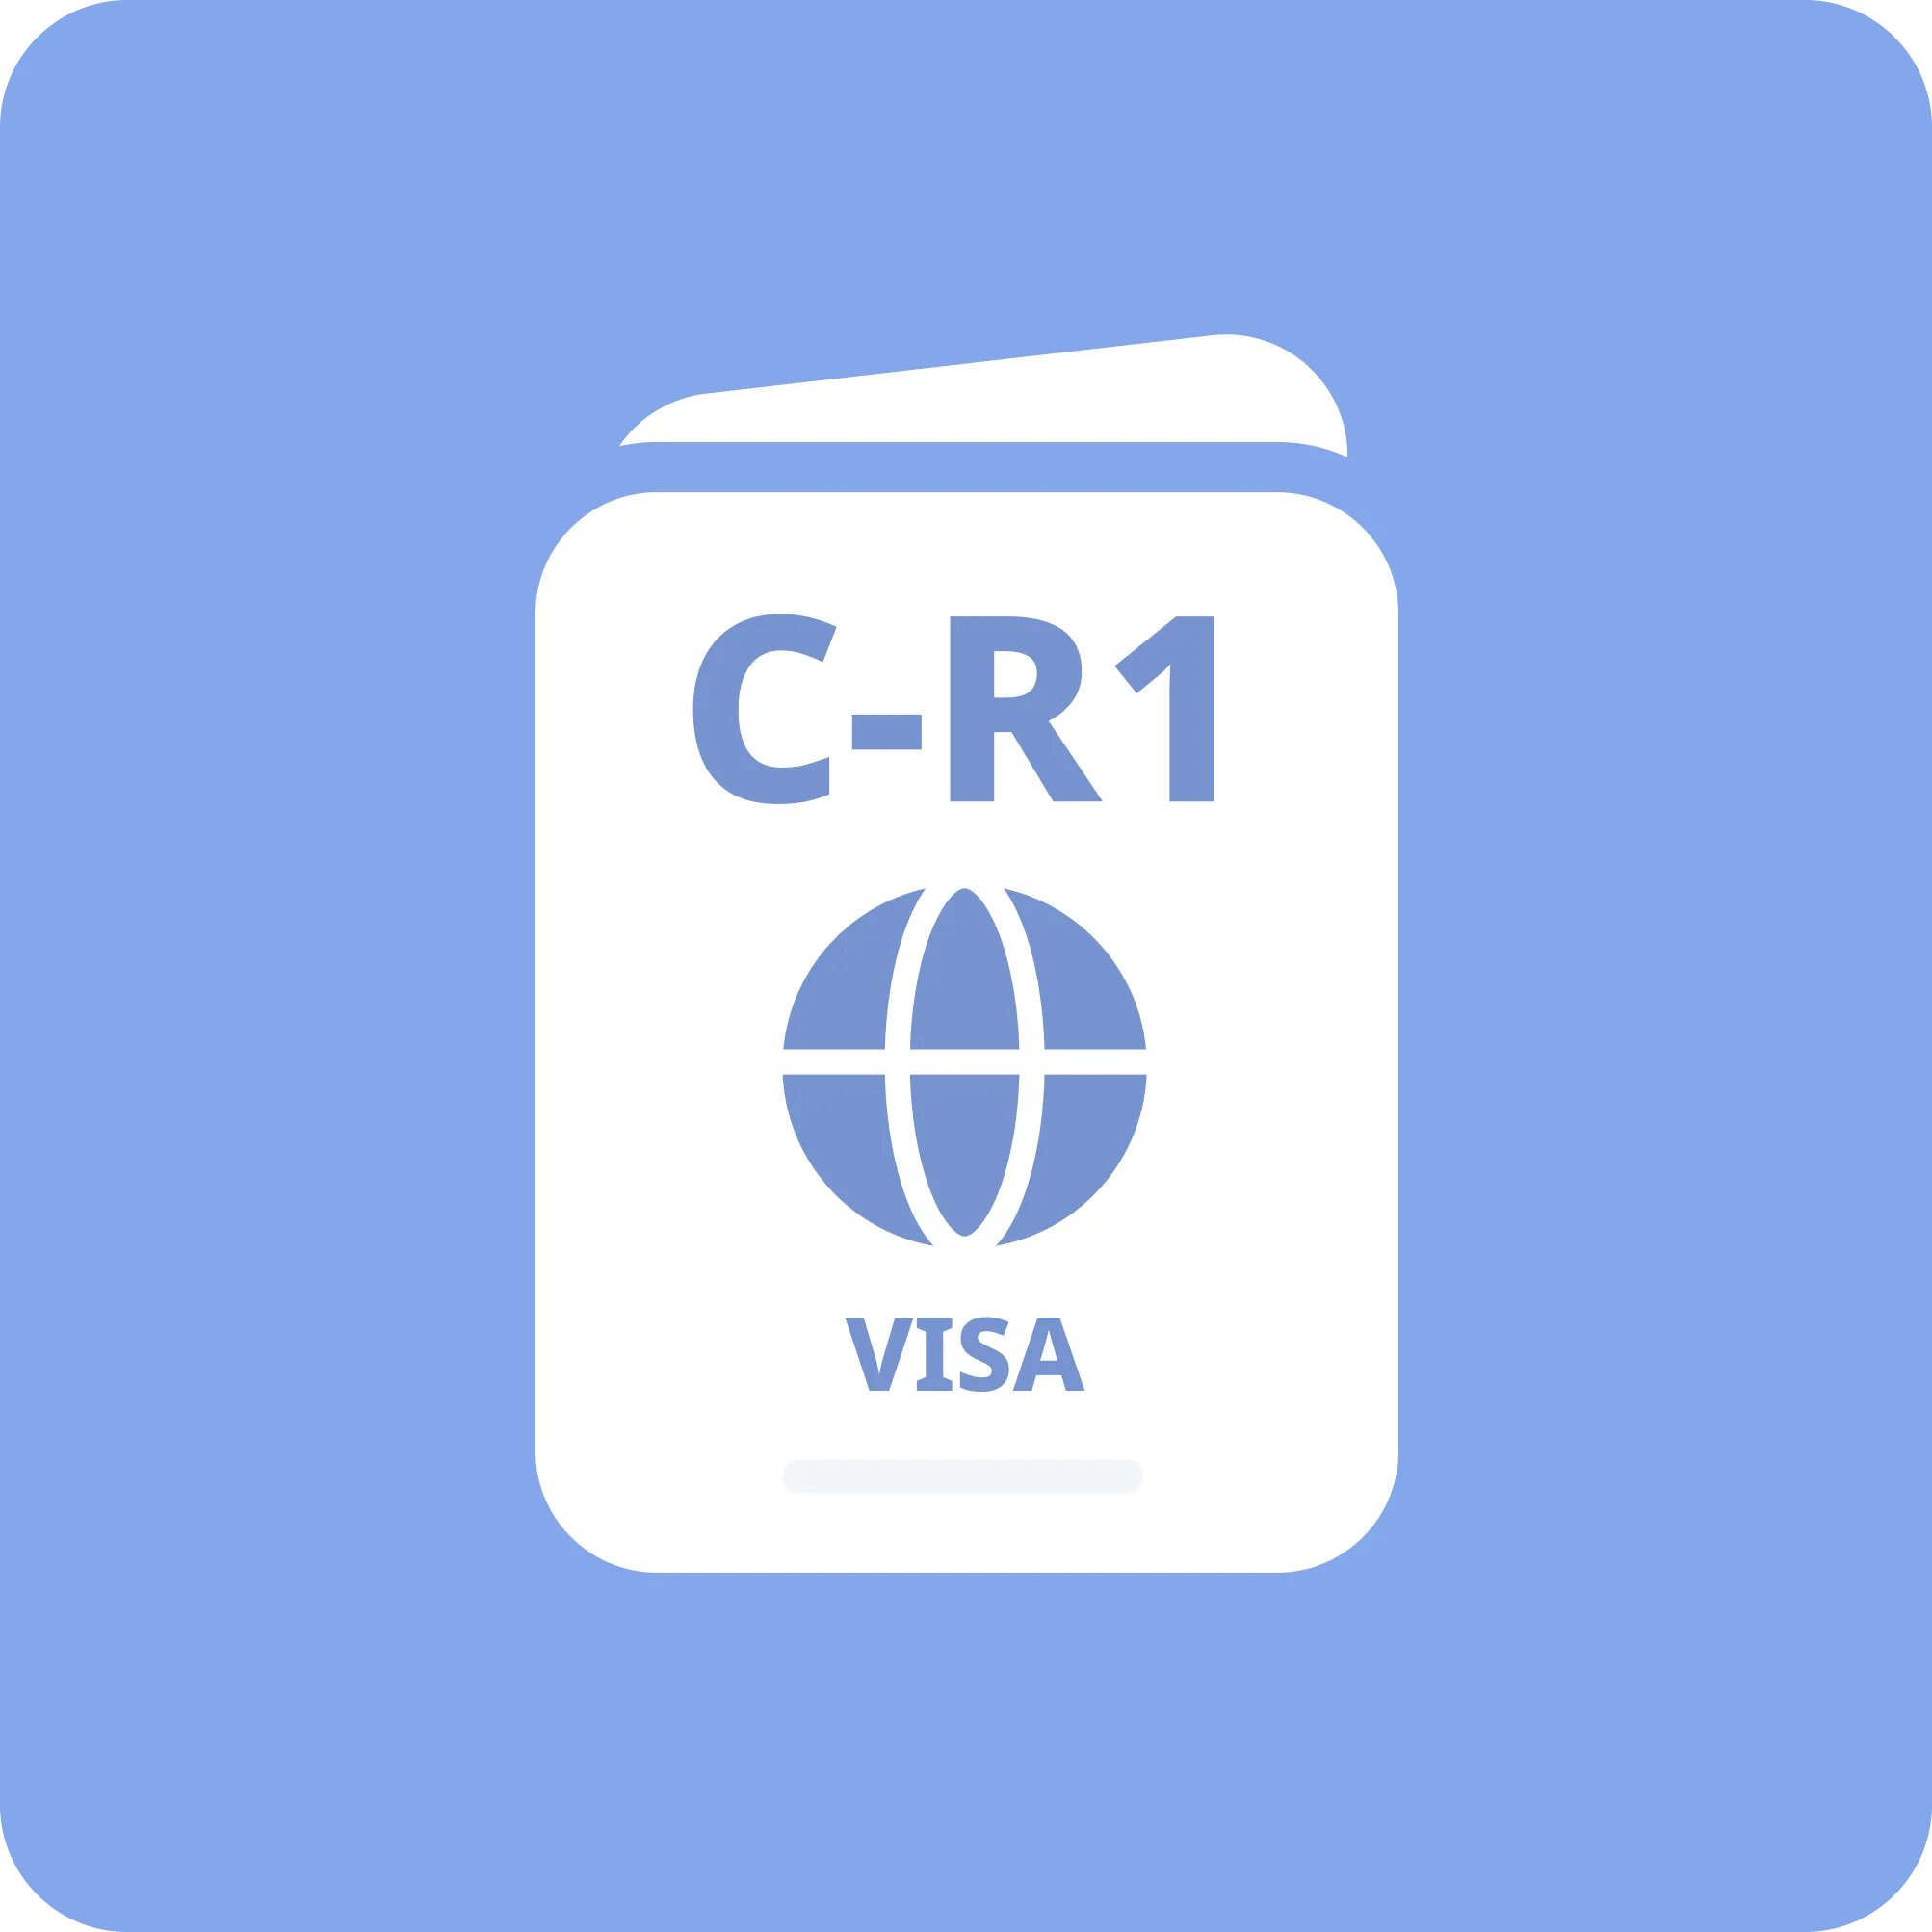 CR1 Visa Unveiled: Crafting a United Future in the United States